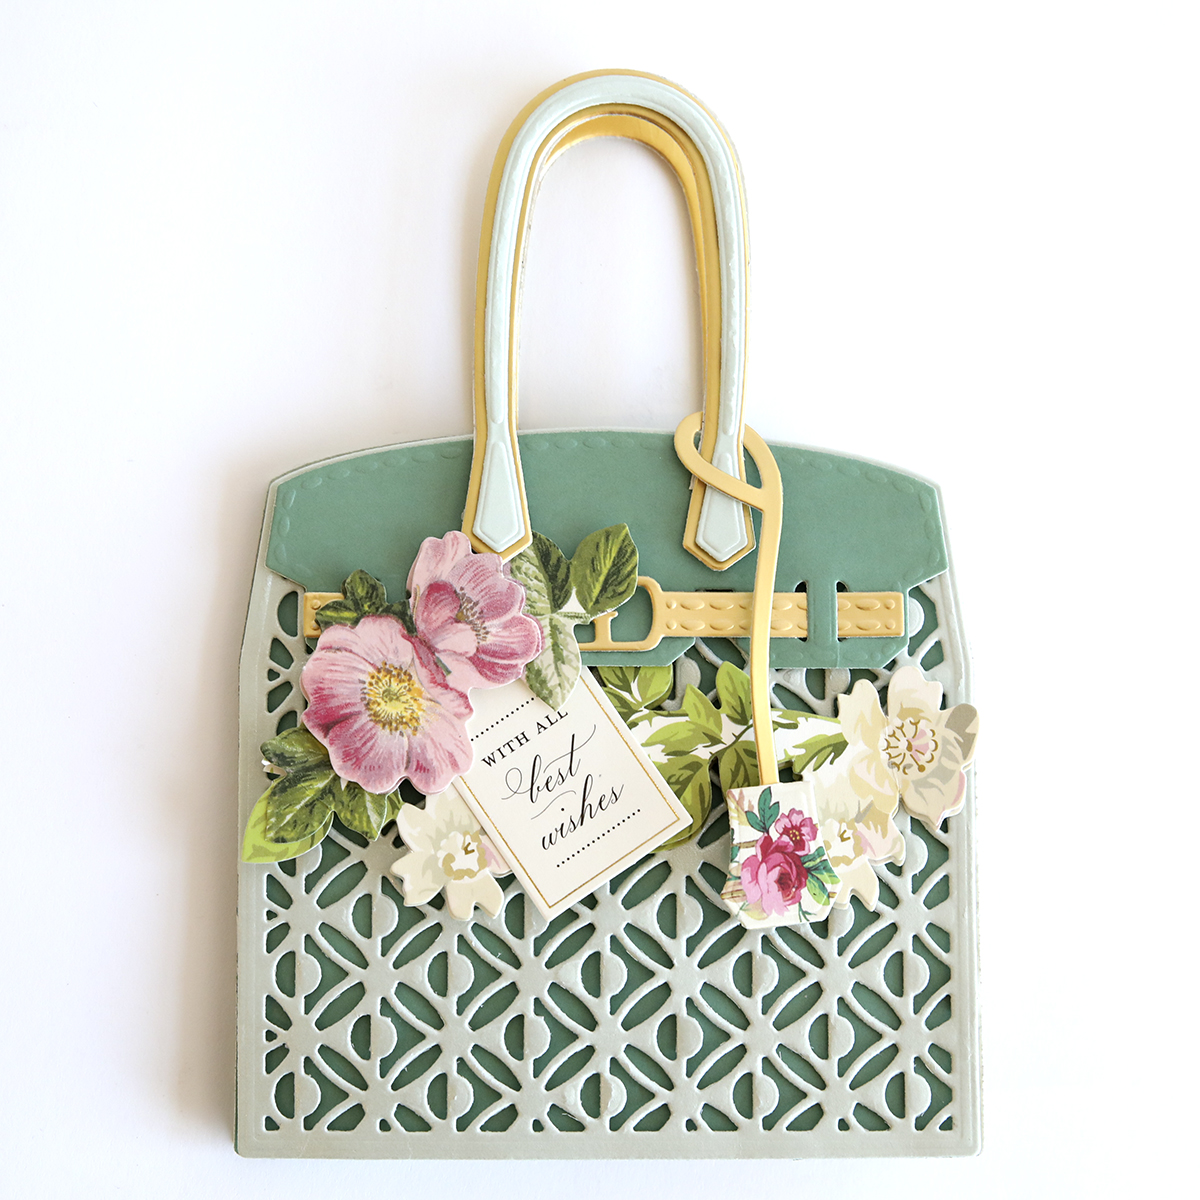 a purse with a tag and flowers on it.